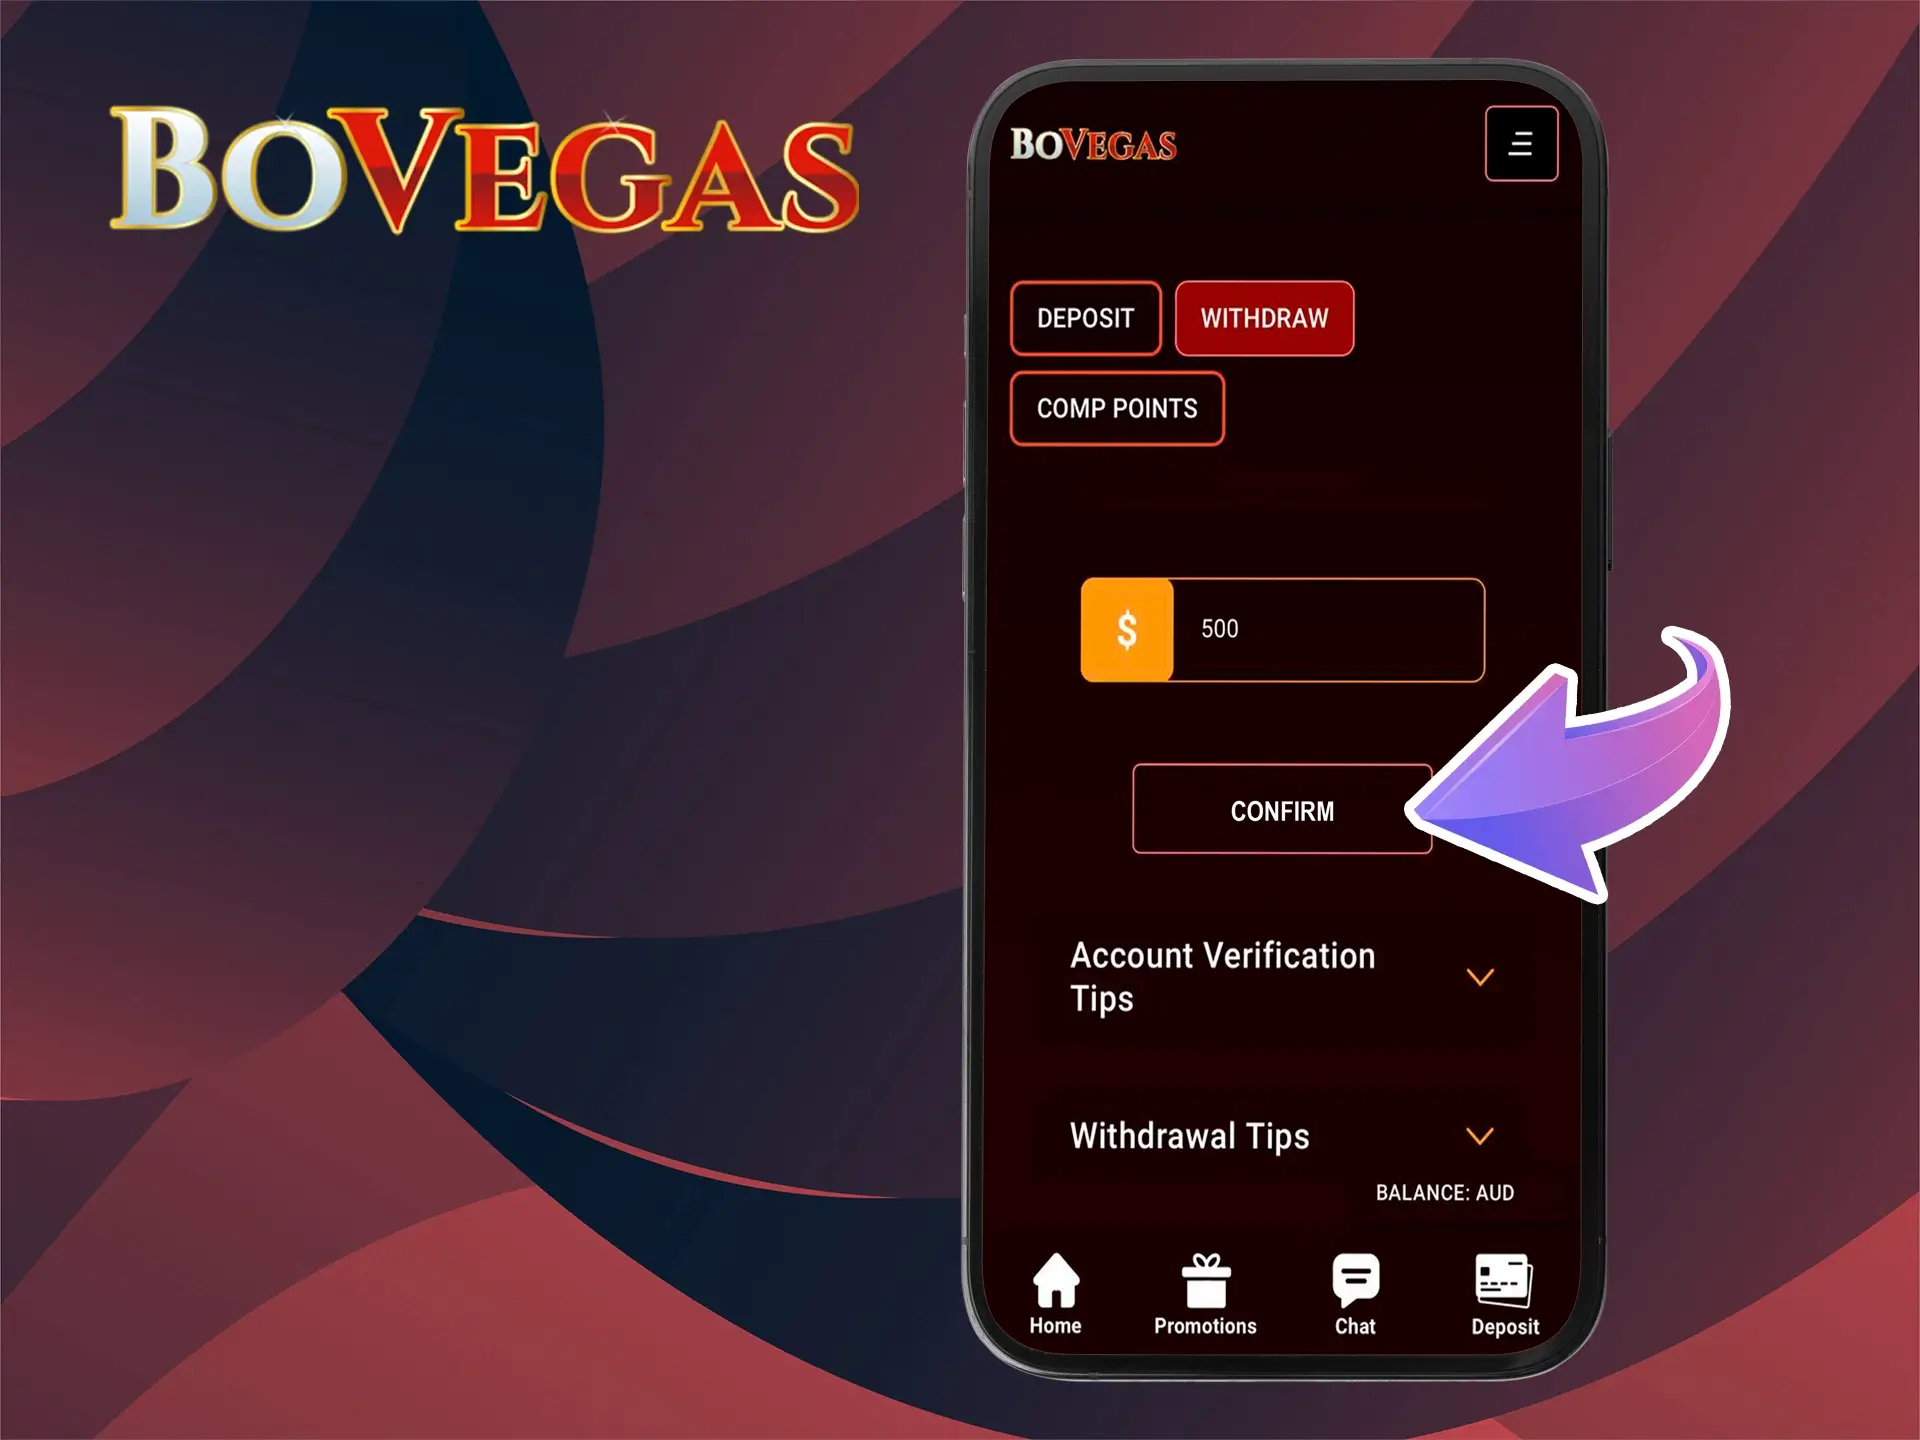 Enter the amount you need and confirm your withdrawal from BoVegas.